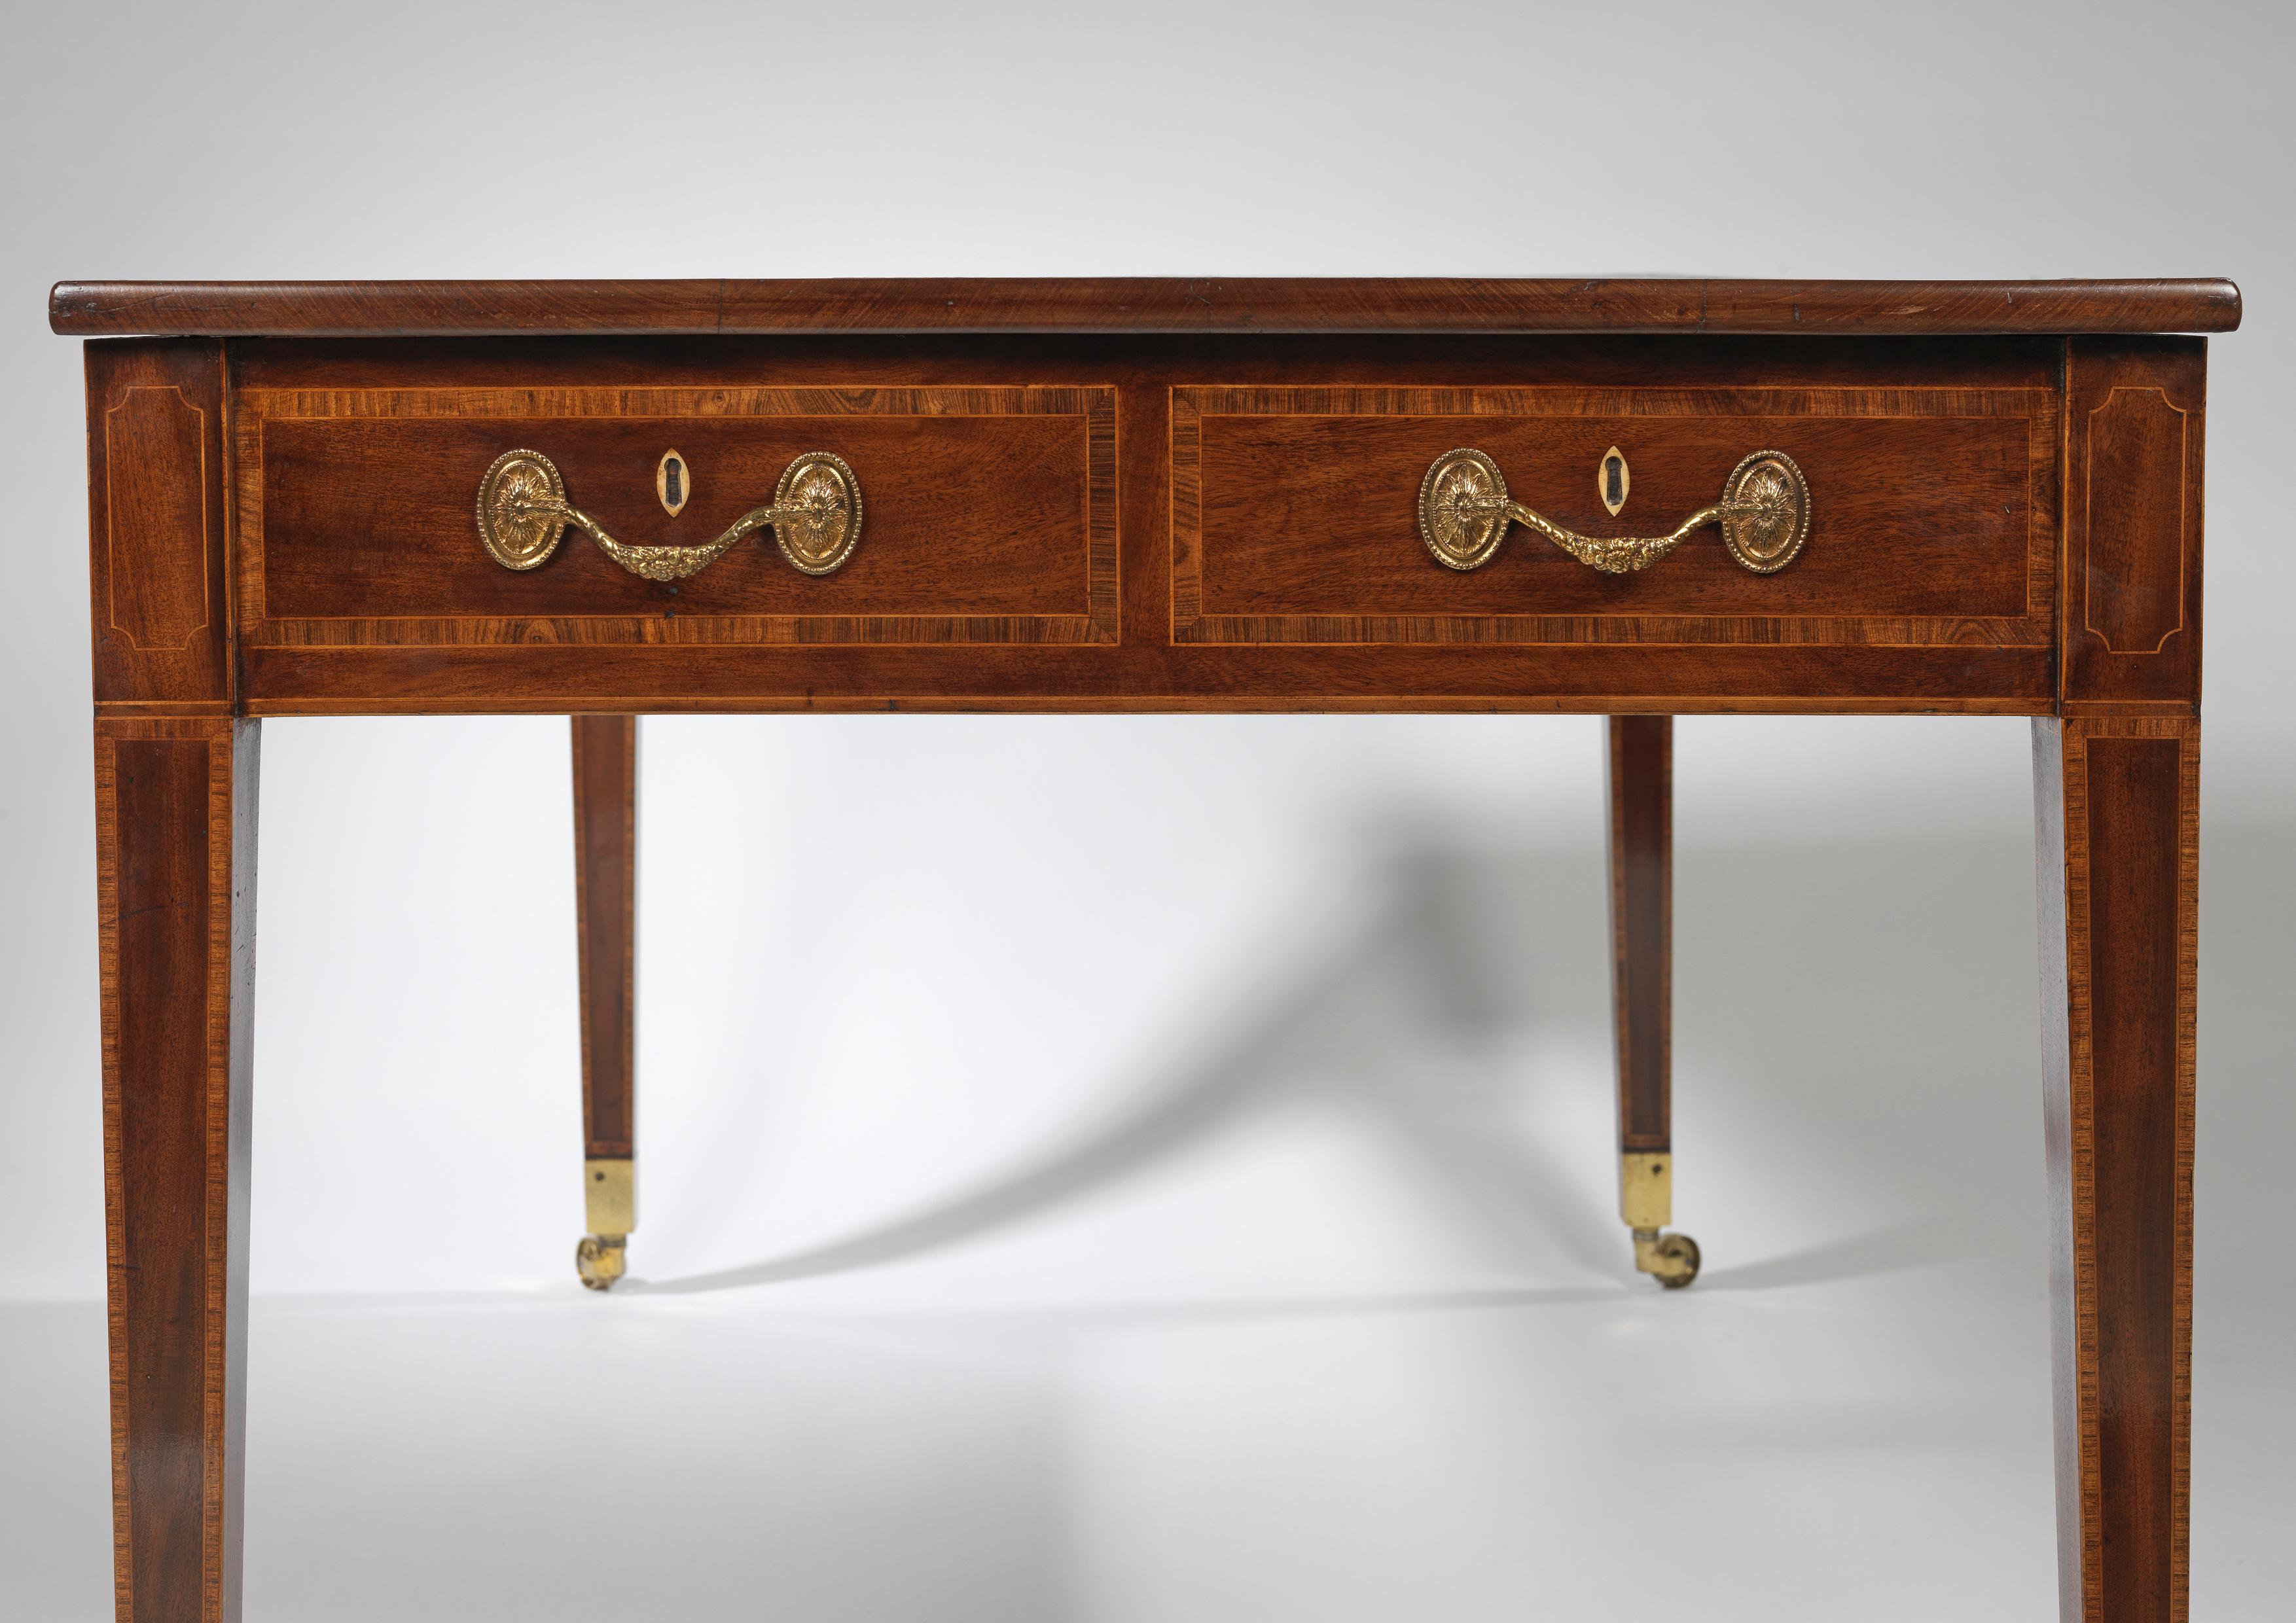 A fine late 18th century Hepplewhite period mahogany writing table, the crossbanded rectangular gilt tooled dark brown old leather lined top above three short cross banded drawers on both sides, retaining their original swag handles, bone